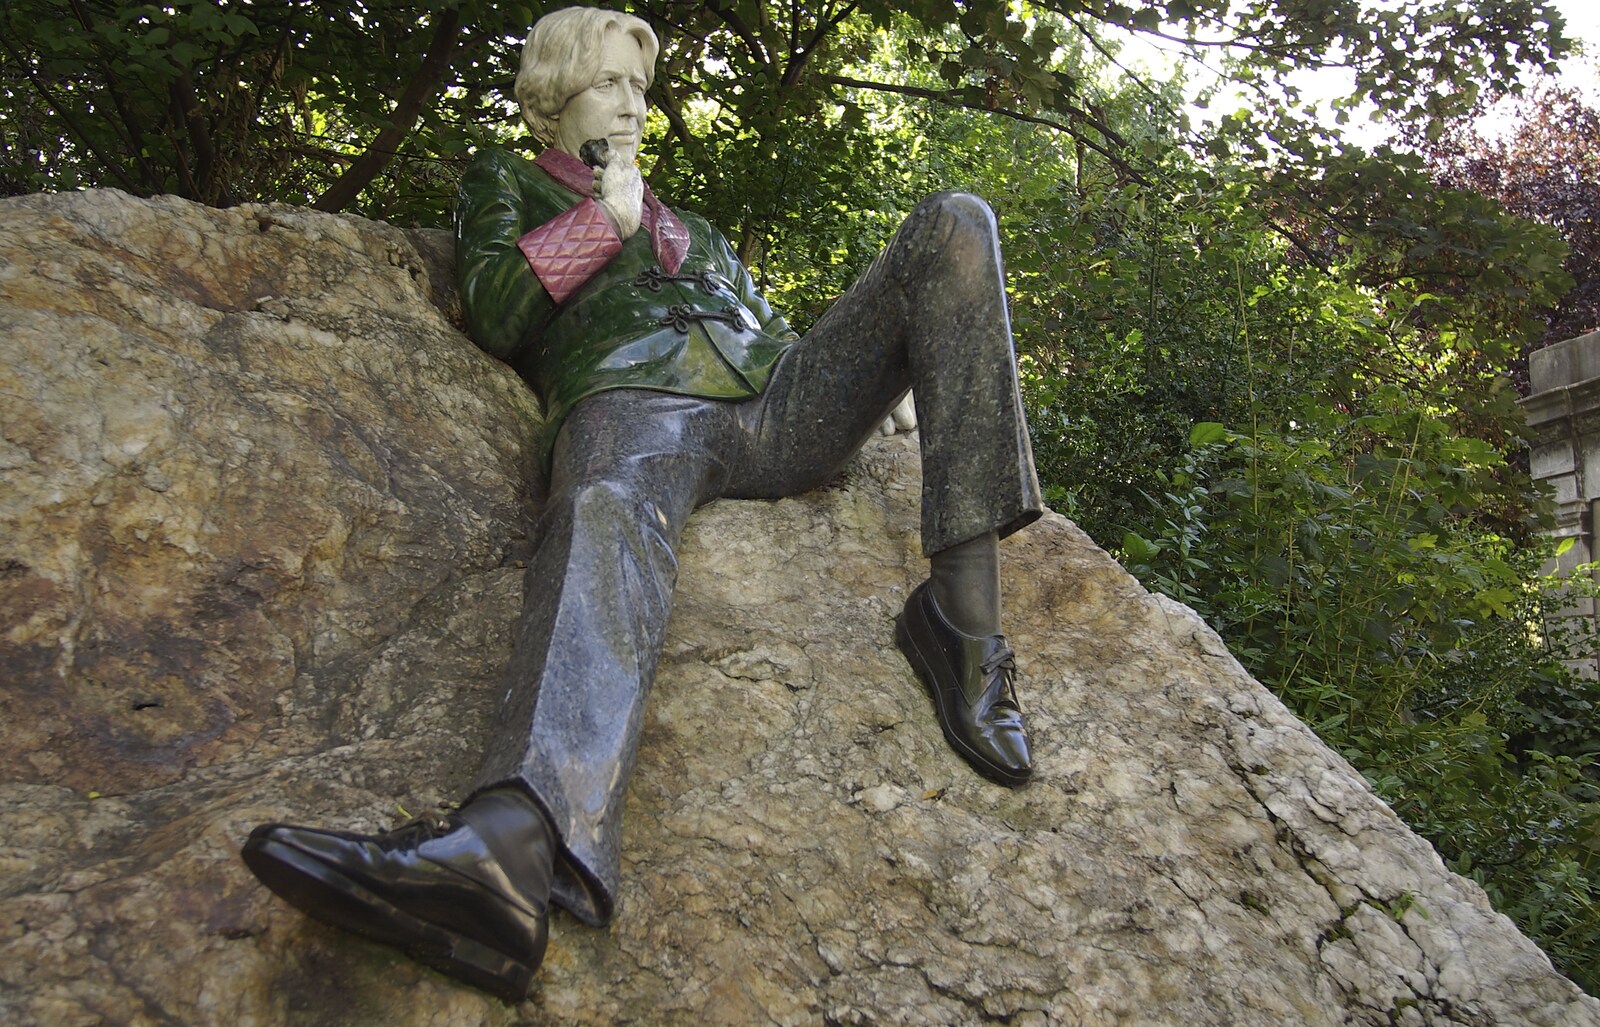 Blackrock and Dublin, Ireland - 24th September 2007: The statue of Oscar Wilde, lying on a rock just off Merrion Square, Dublin